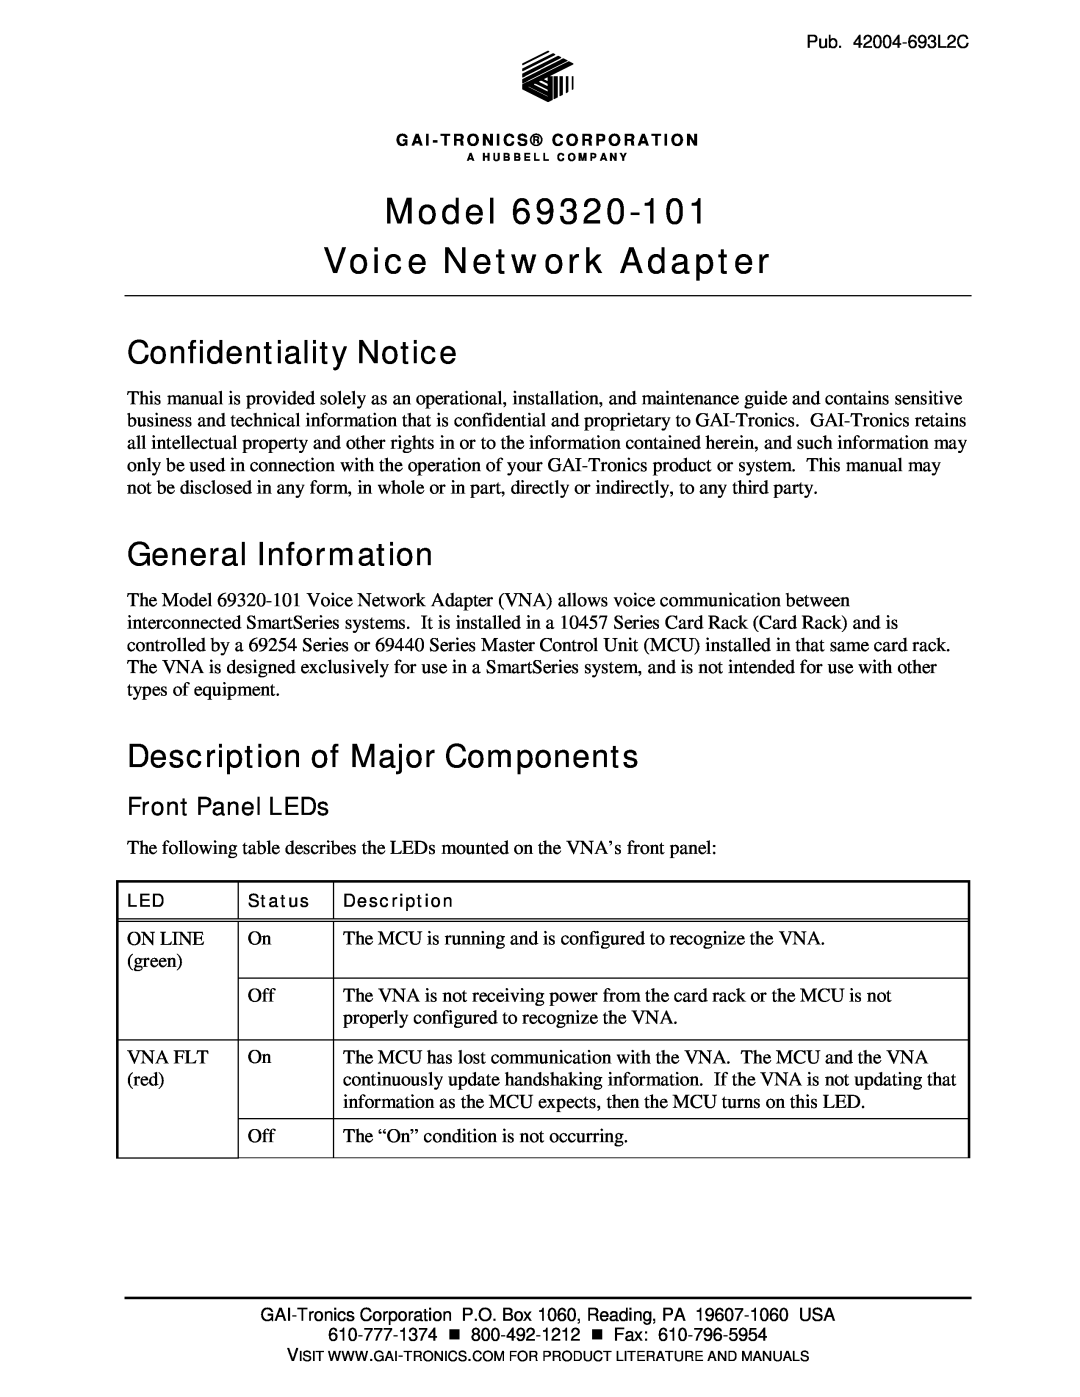 Hubbell 69320-101 manual Confidentiality Notice, General Information, Description of Major Components, Front Panel LEDs 